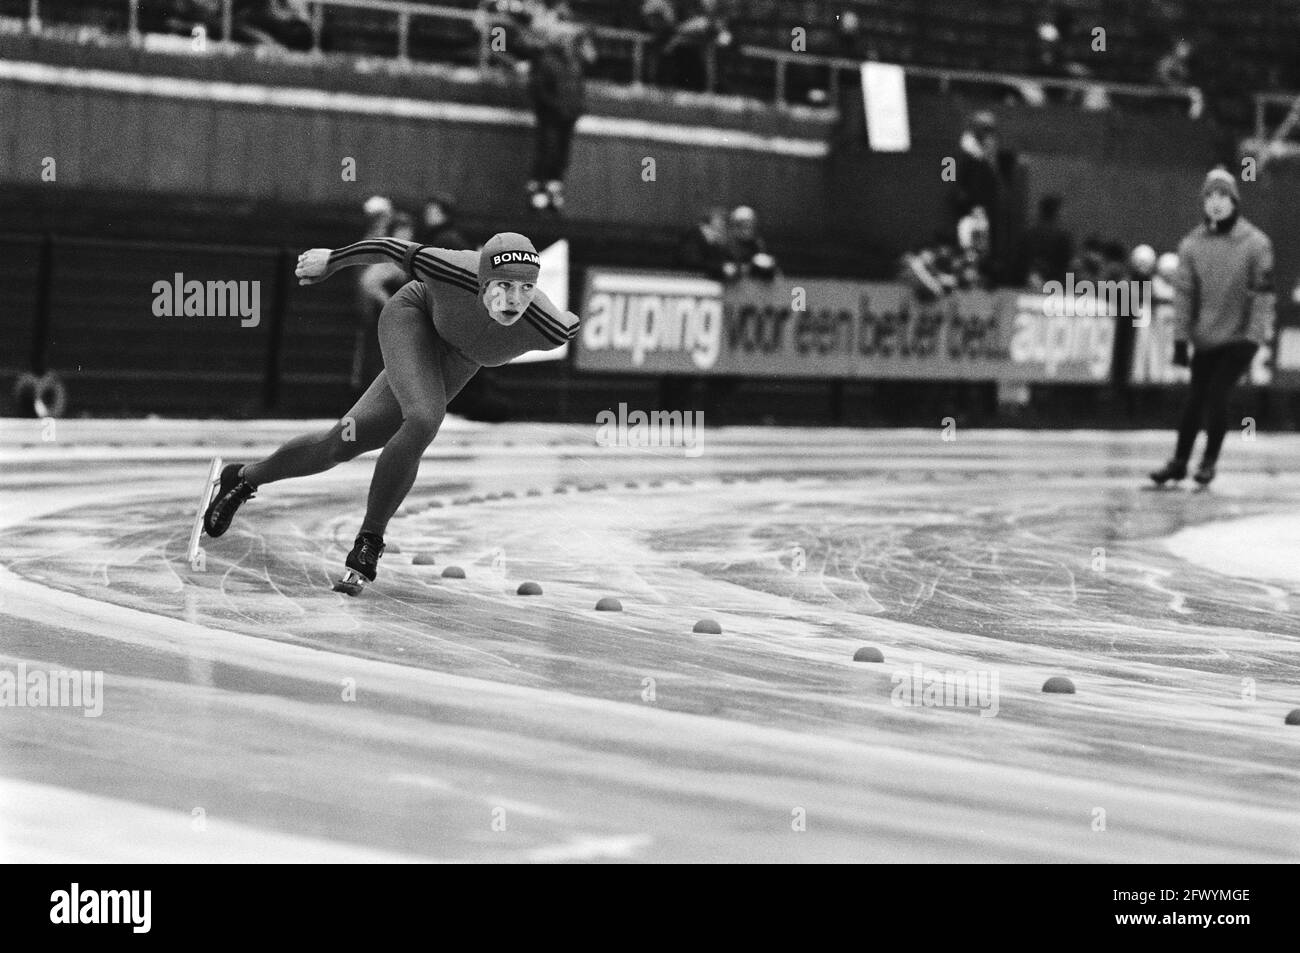 Ria Visser in action at the 1500 meters, January 9, 1983, skating, skating competitions, sports, The Netherlands, 20th century press agency photo, news to remember, documentary, historic photography 1945-1990, visual stories, human history of the Twentieth Century, capturing moments in time Stock Photo